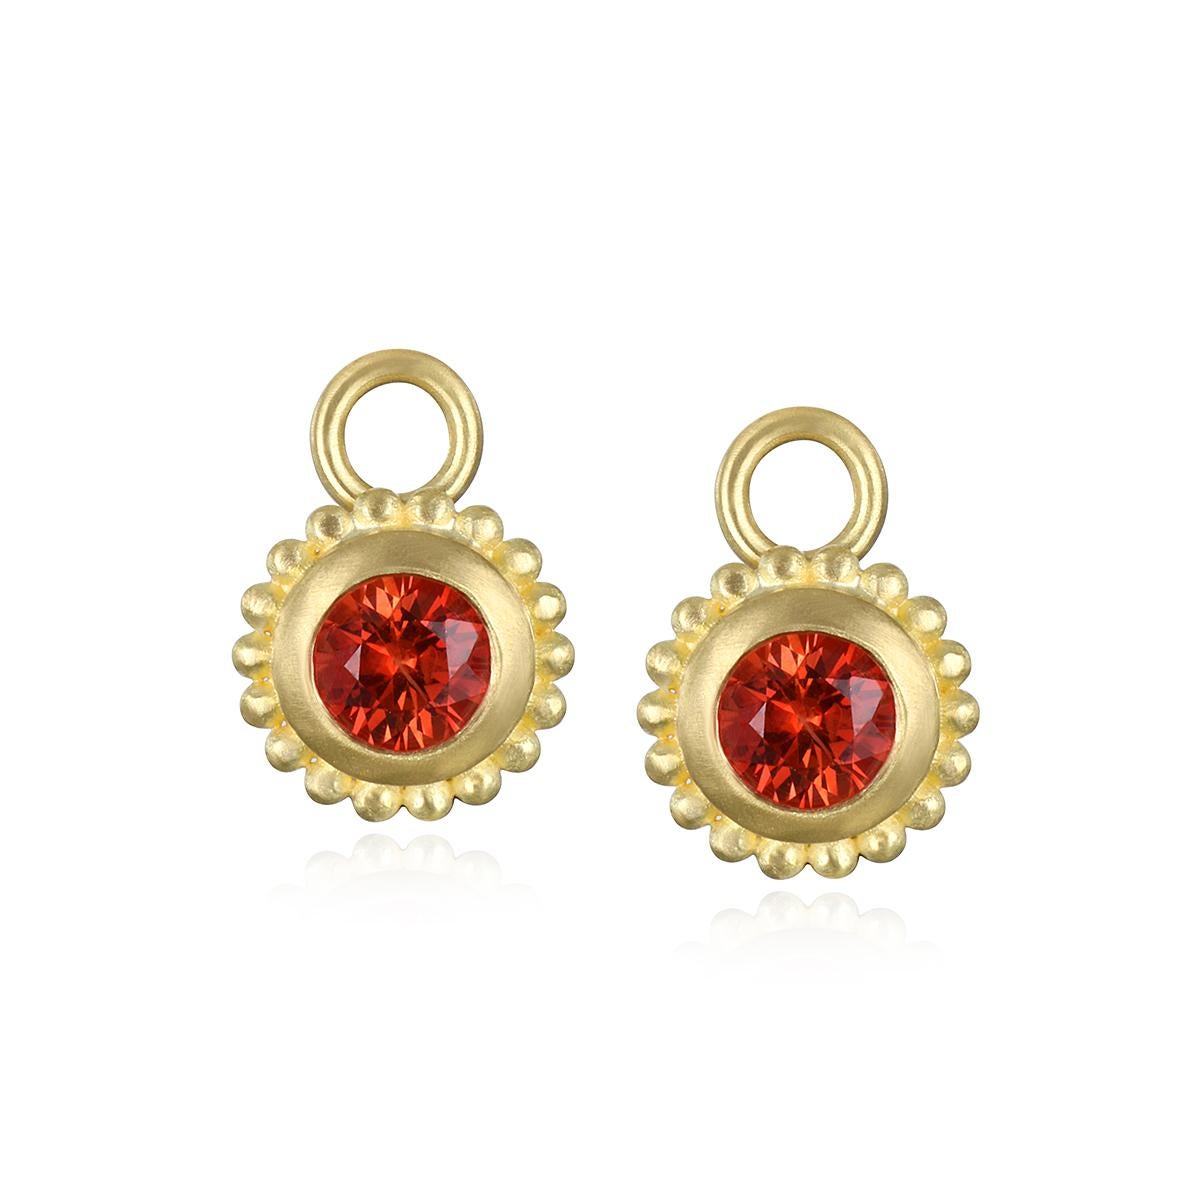 Faye Kim's 18 Karat Gold Wire Hoops - Matte finished, with removable Orange Sapphire Granulation Drops, these earrings would be a versatile and stylish addition to your jewelry collection.

Hoops 1